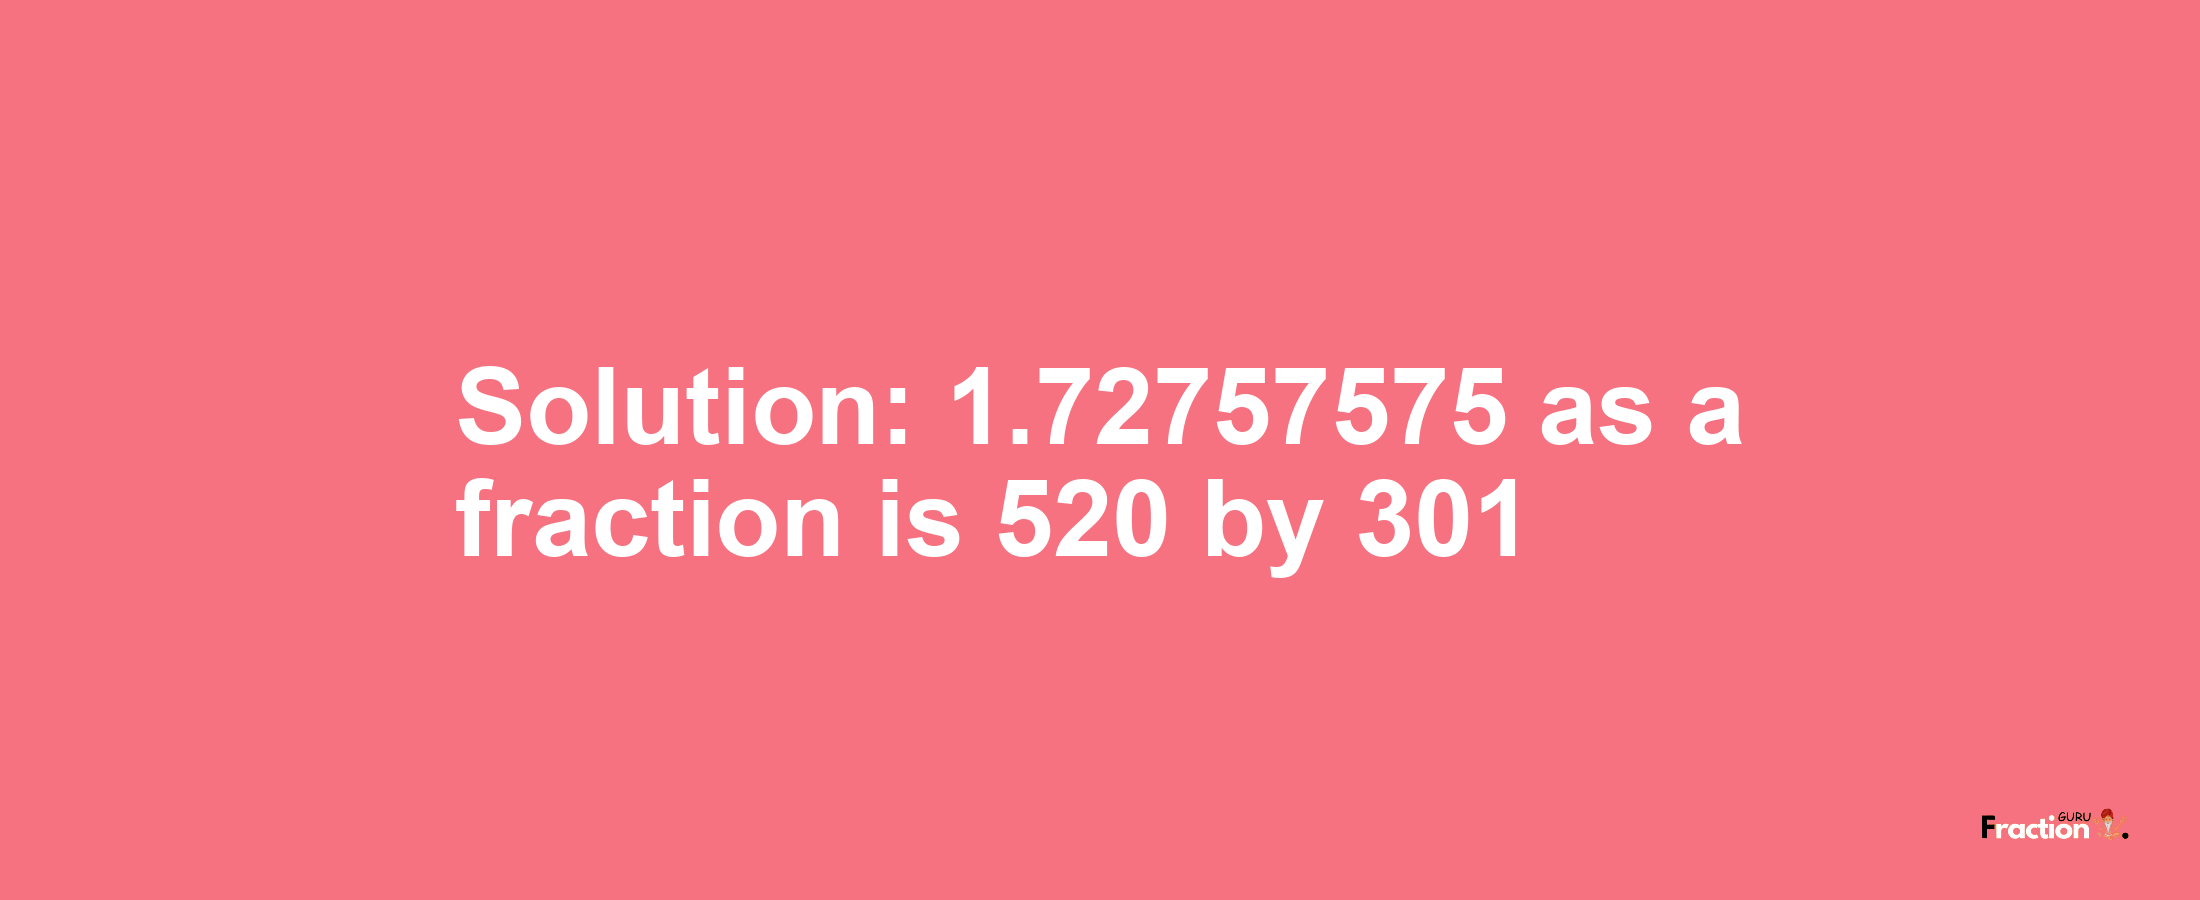 Solution:1.72757575 as a fraction is 520/301